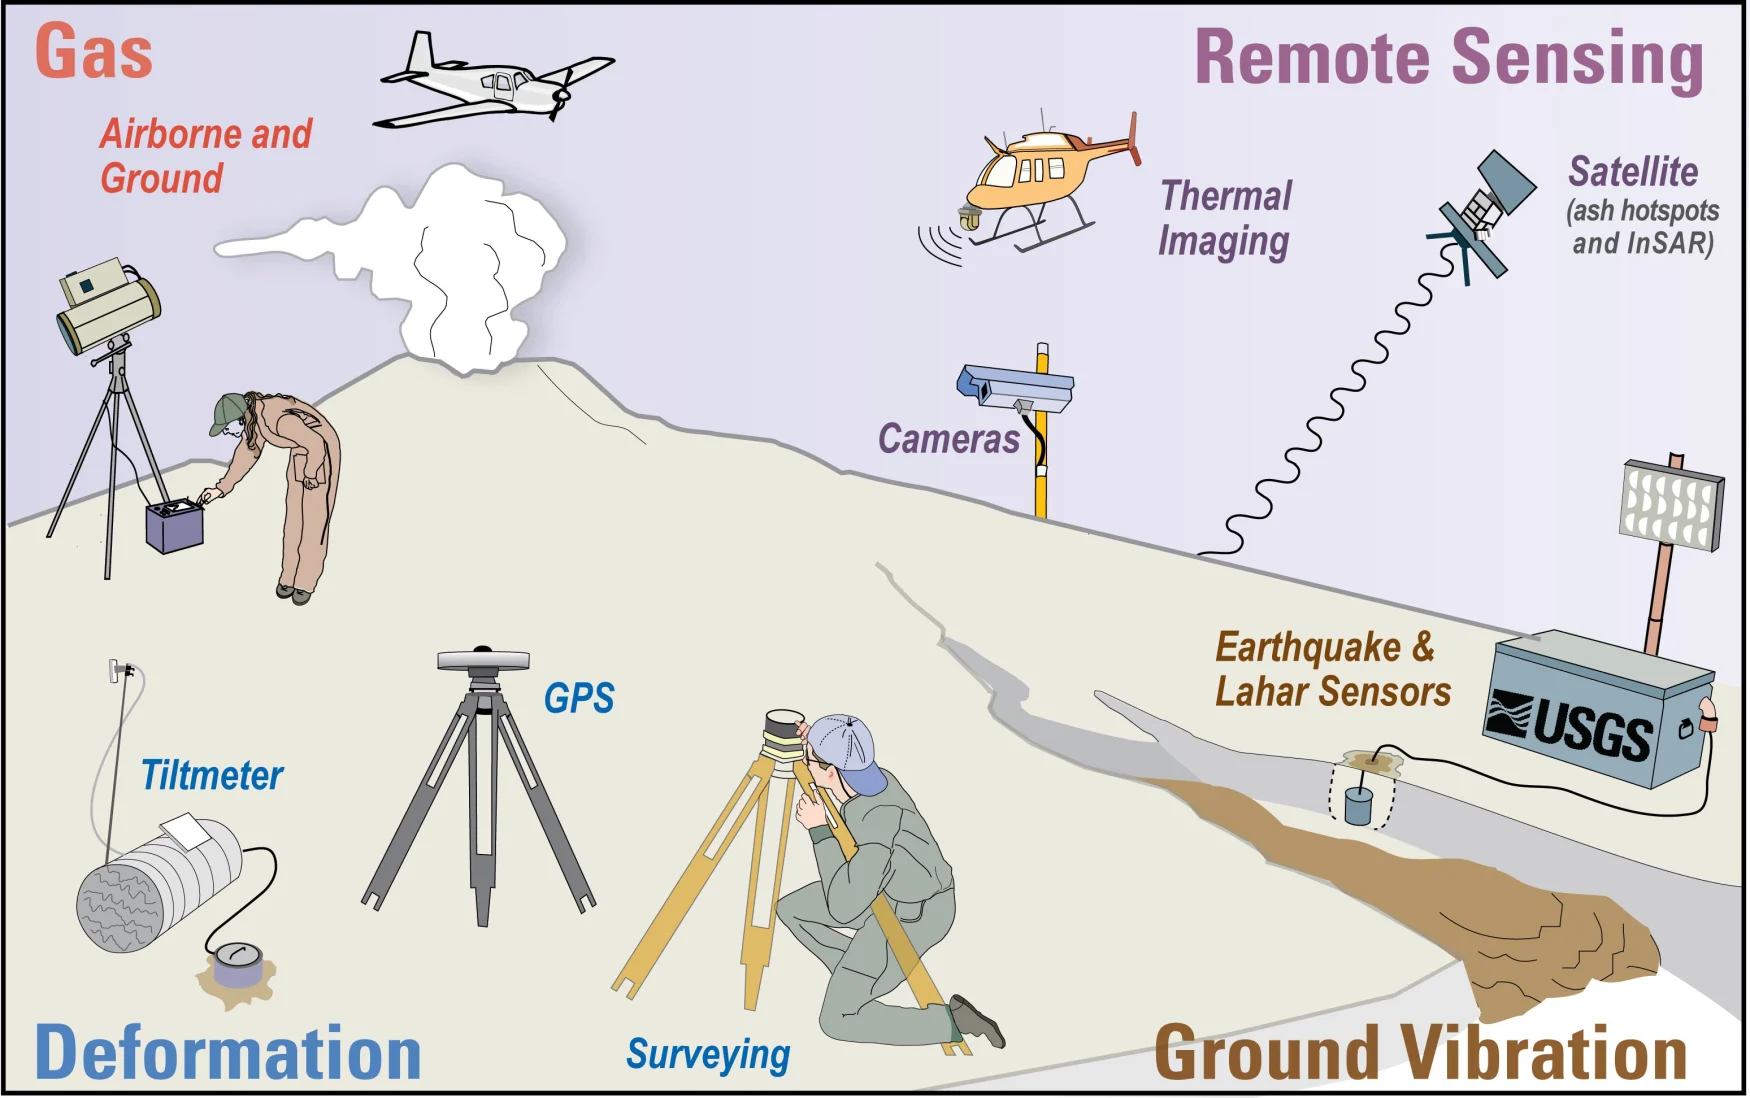 A clipart picture of a stylized voplcano surrounded by cameras, seismic, GOPS, tiltmeter and thermal imaging sensors